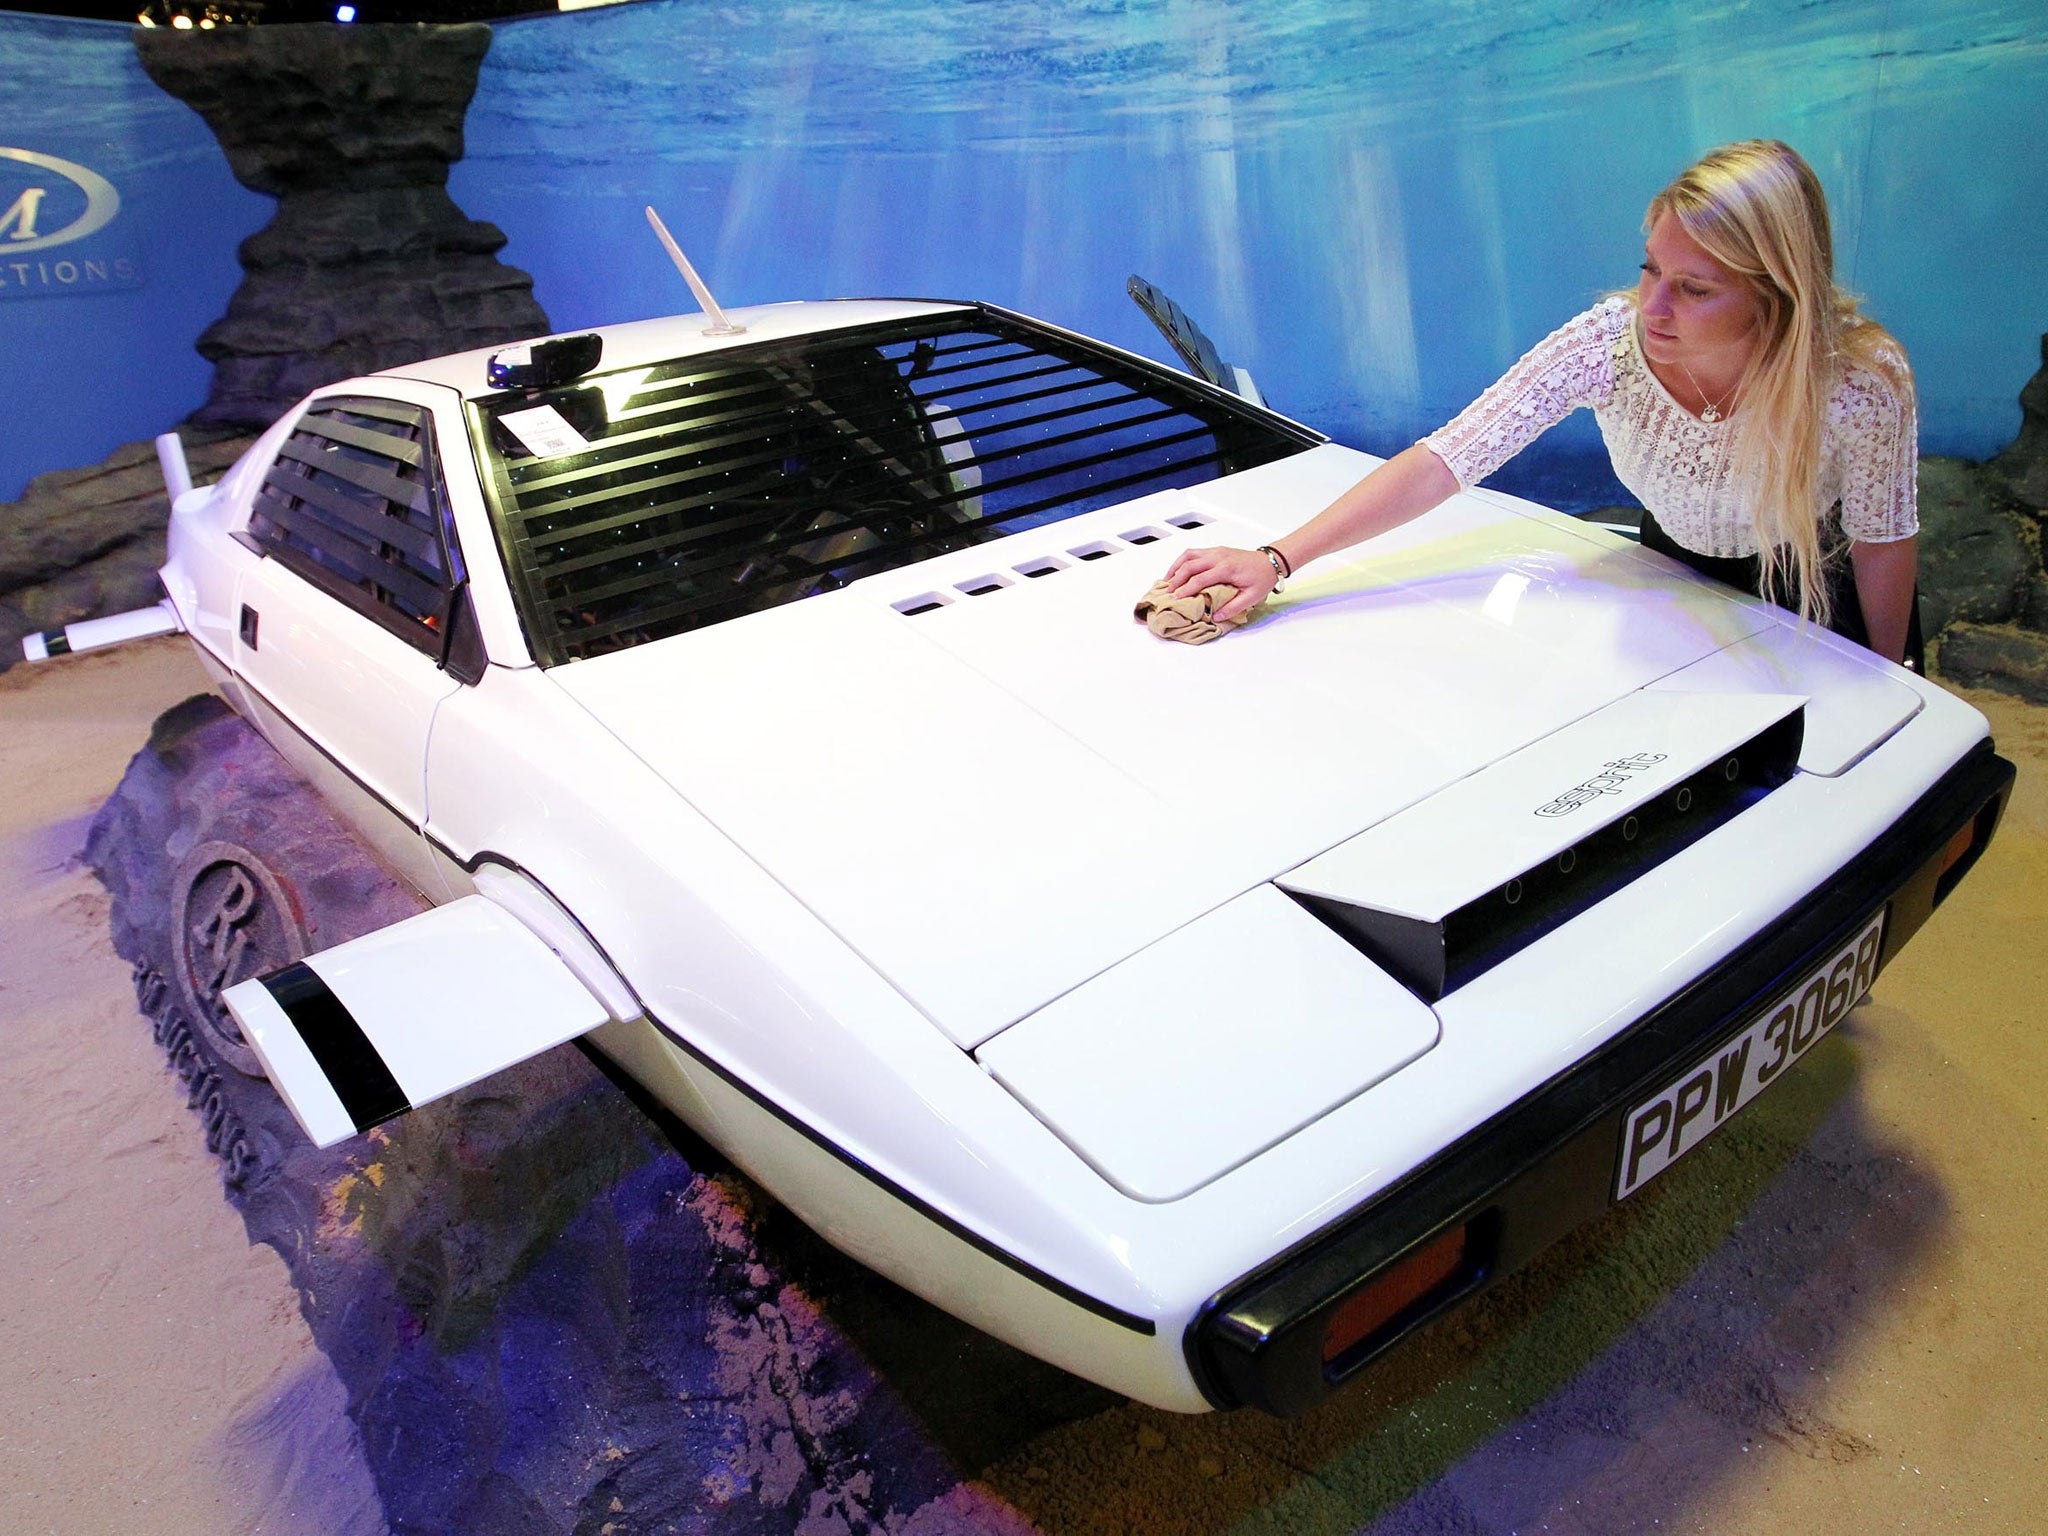 The submarine car used in the James Bond movie The Spy Who Loved sold for £550,000